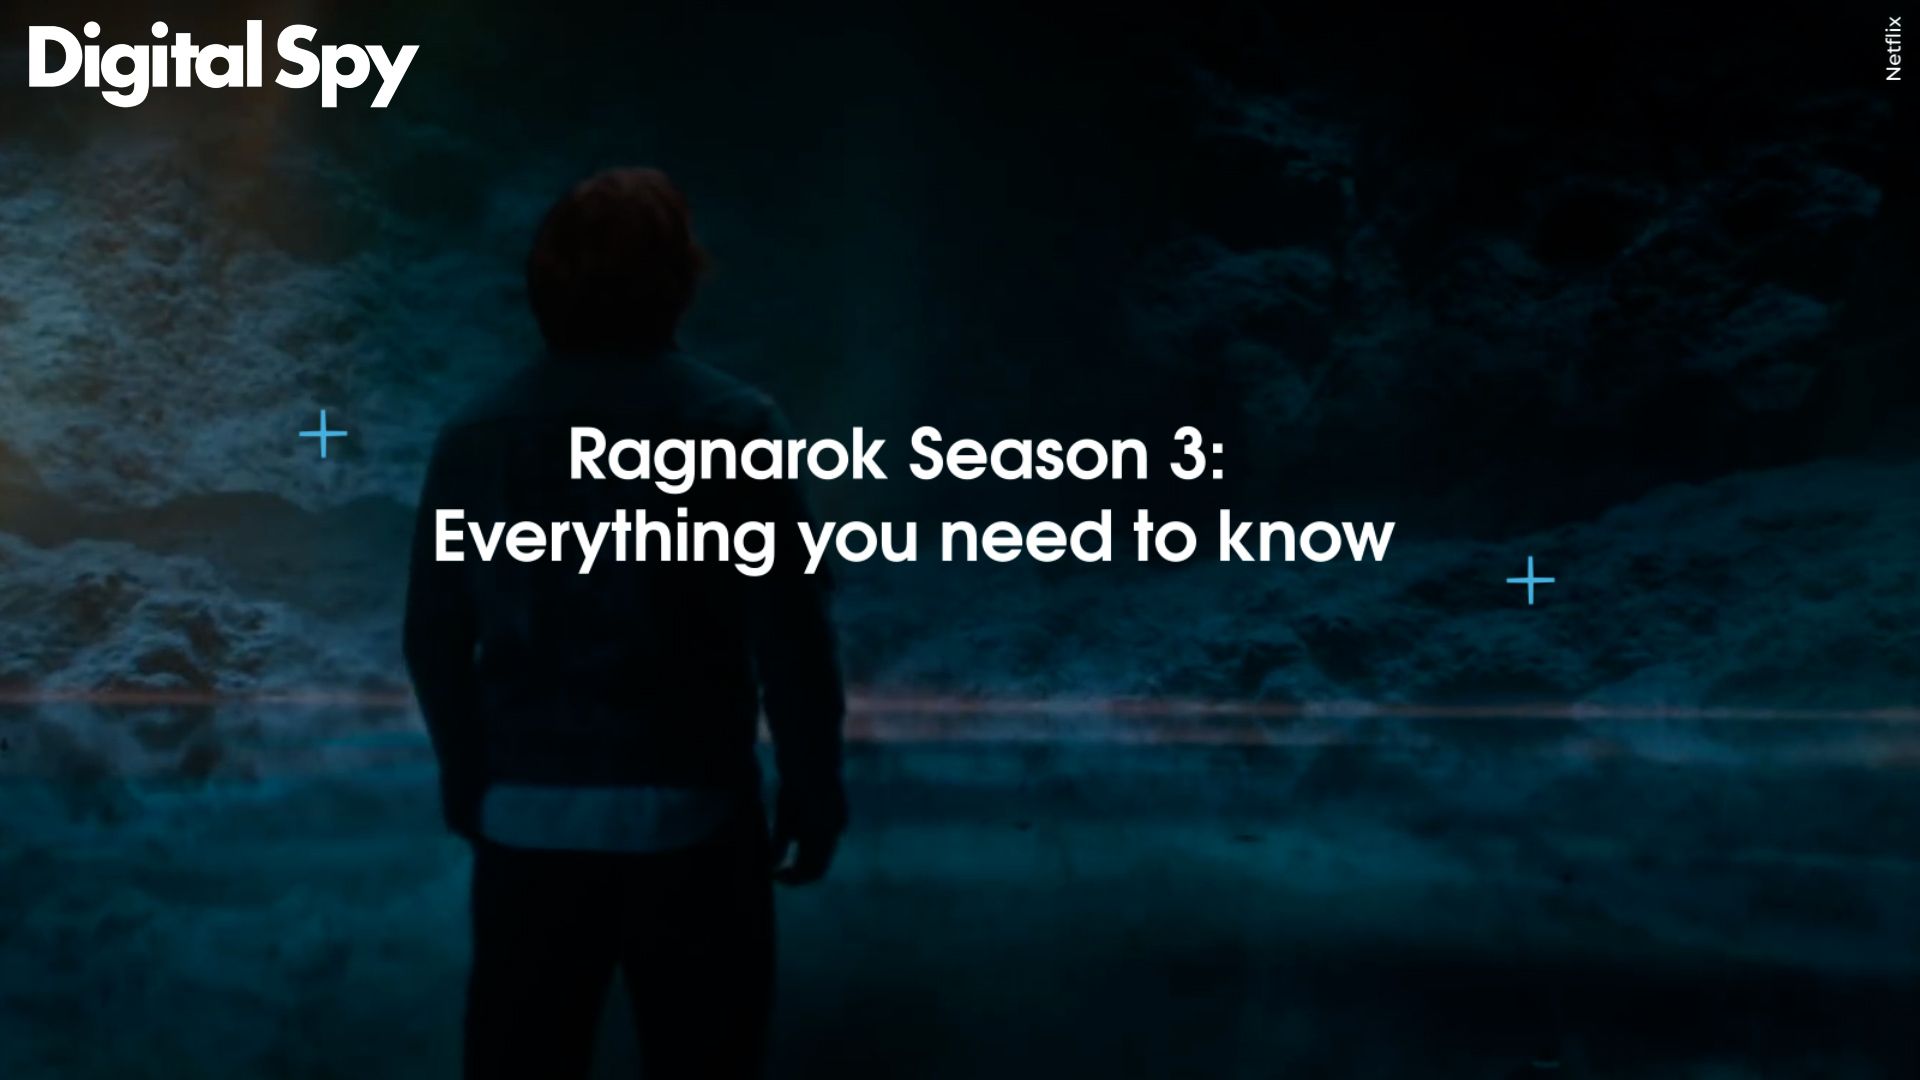 Netflix's Ragnarok: Everything We Know About the Final Season